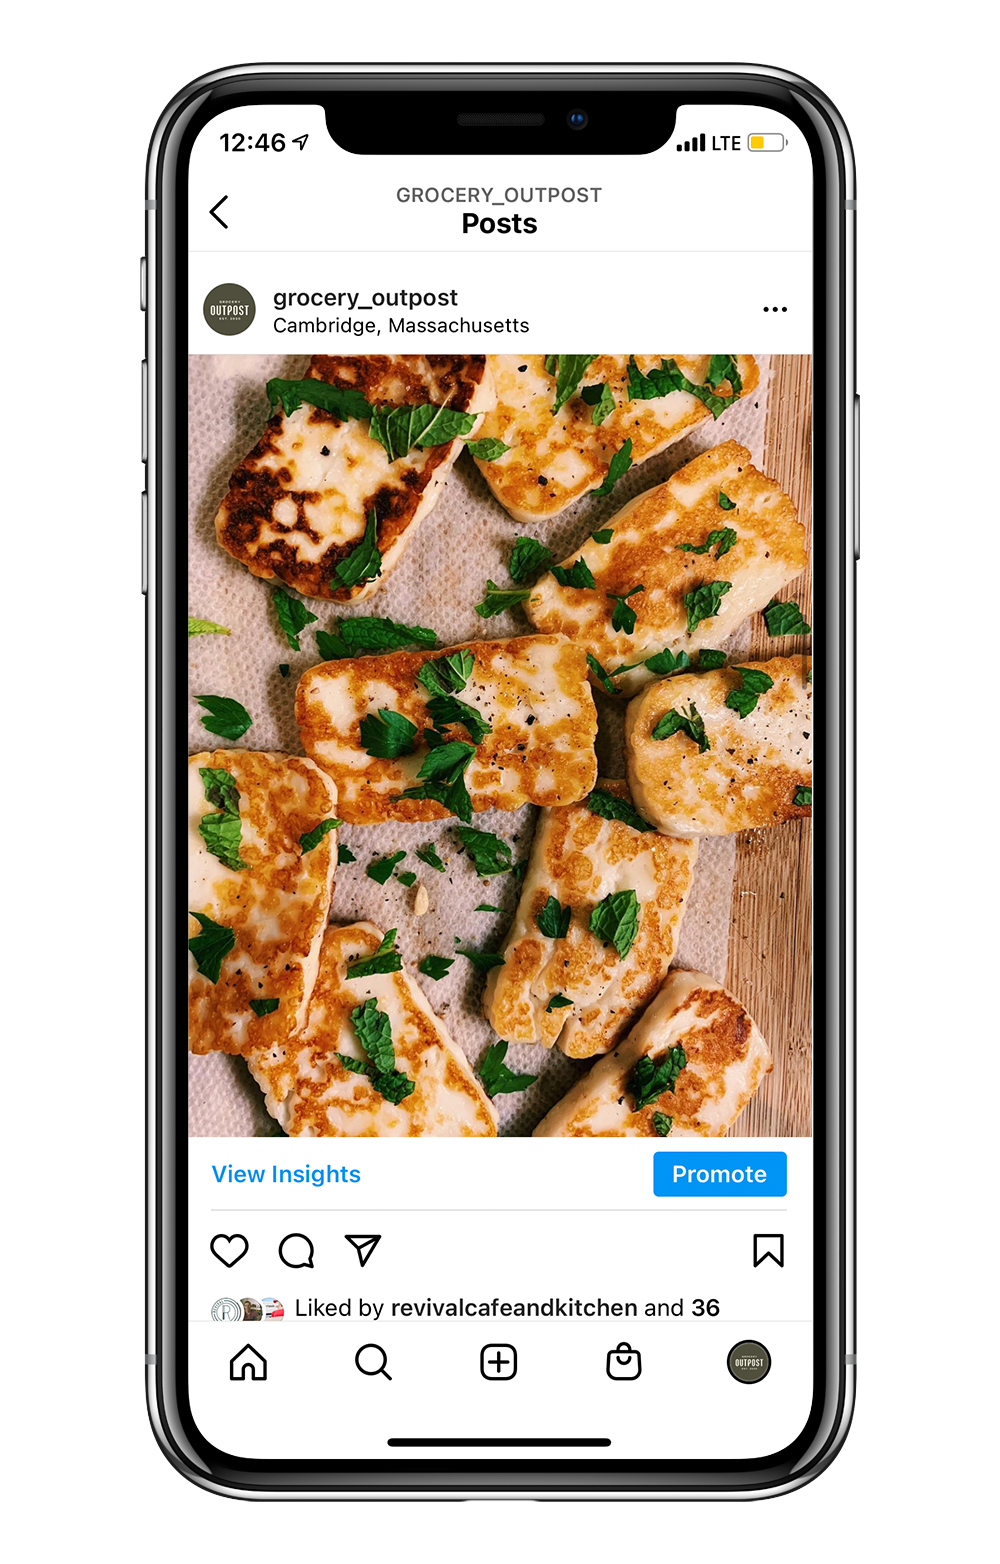 Instagram post showing fried halloumi.